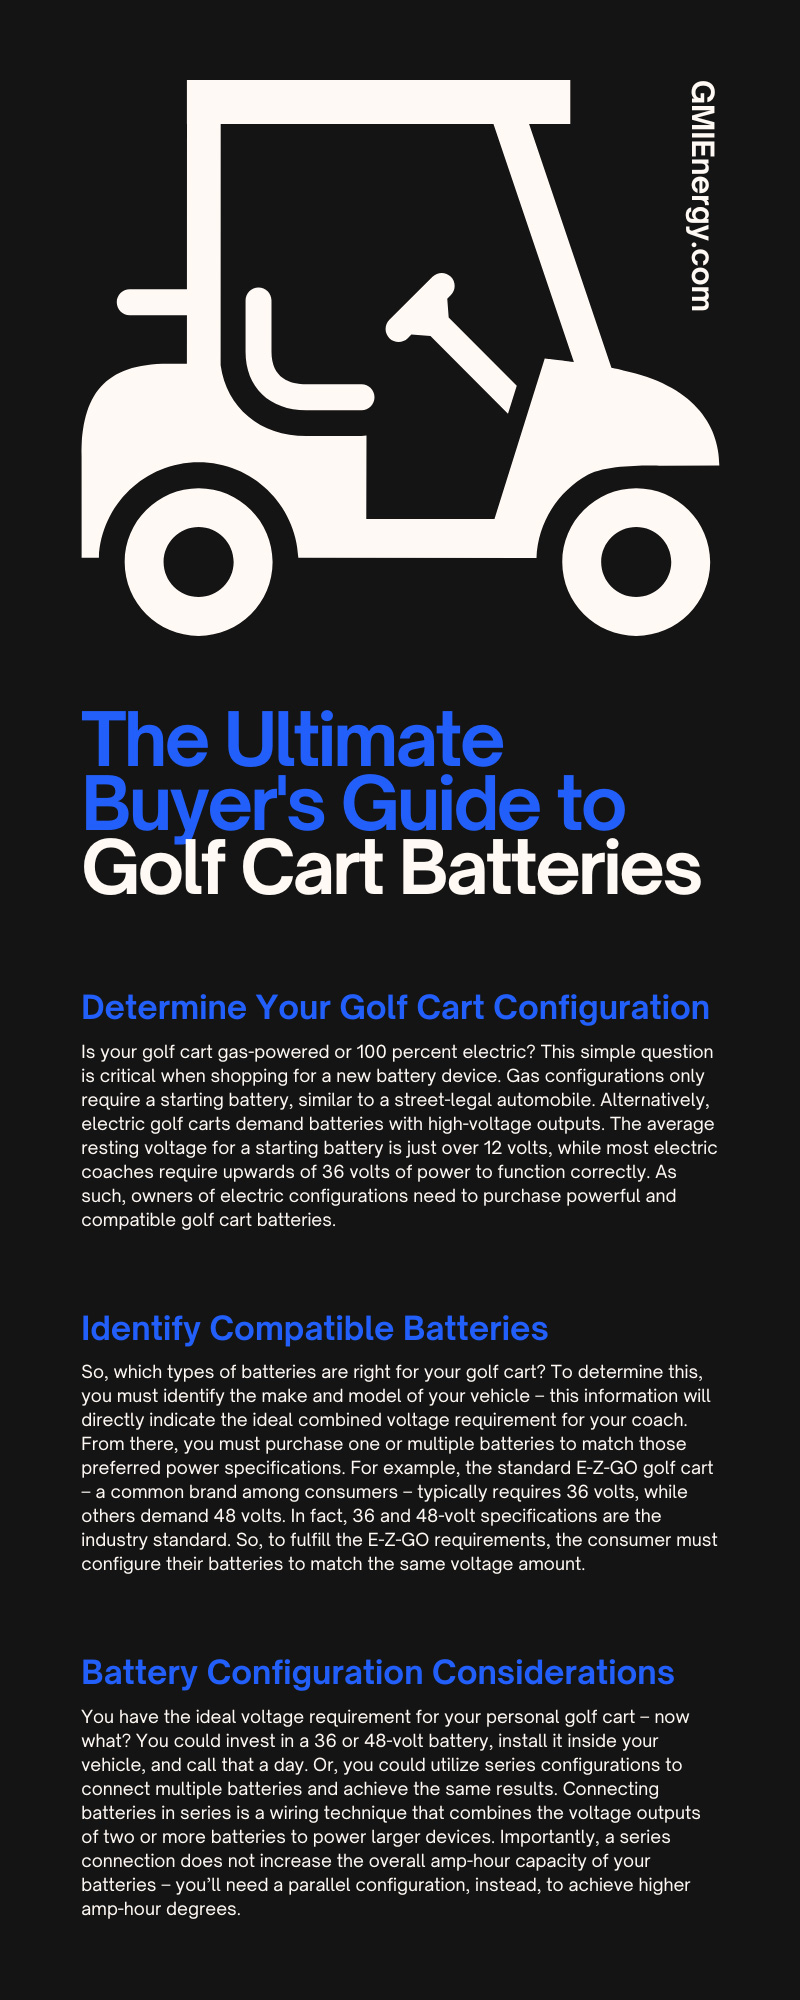 The Ultimate Buyer's Guide to Golf Cart Batteries